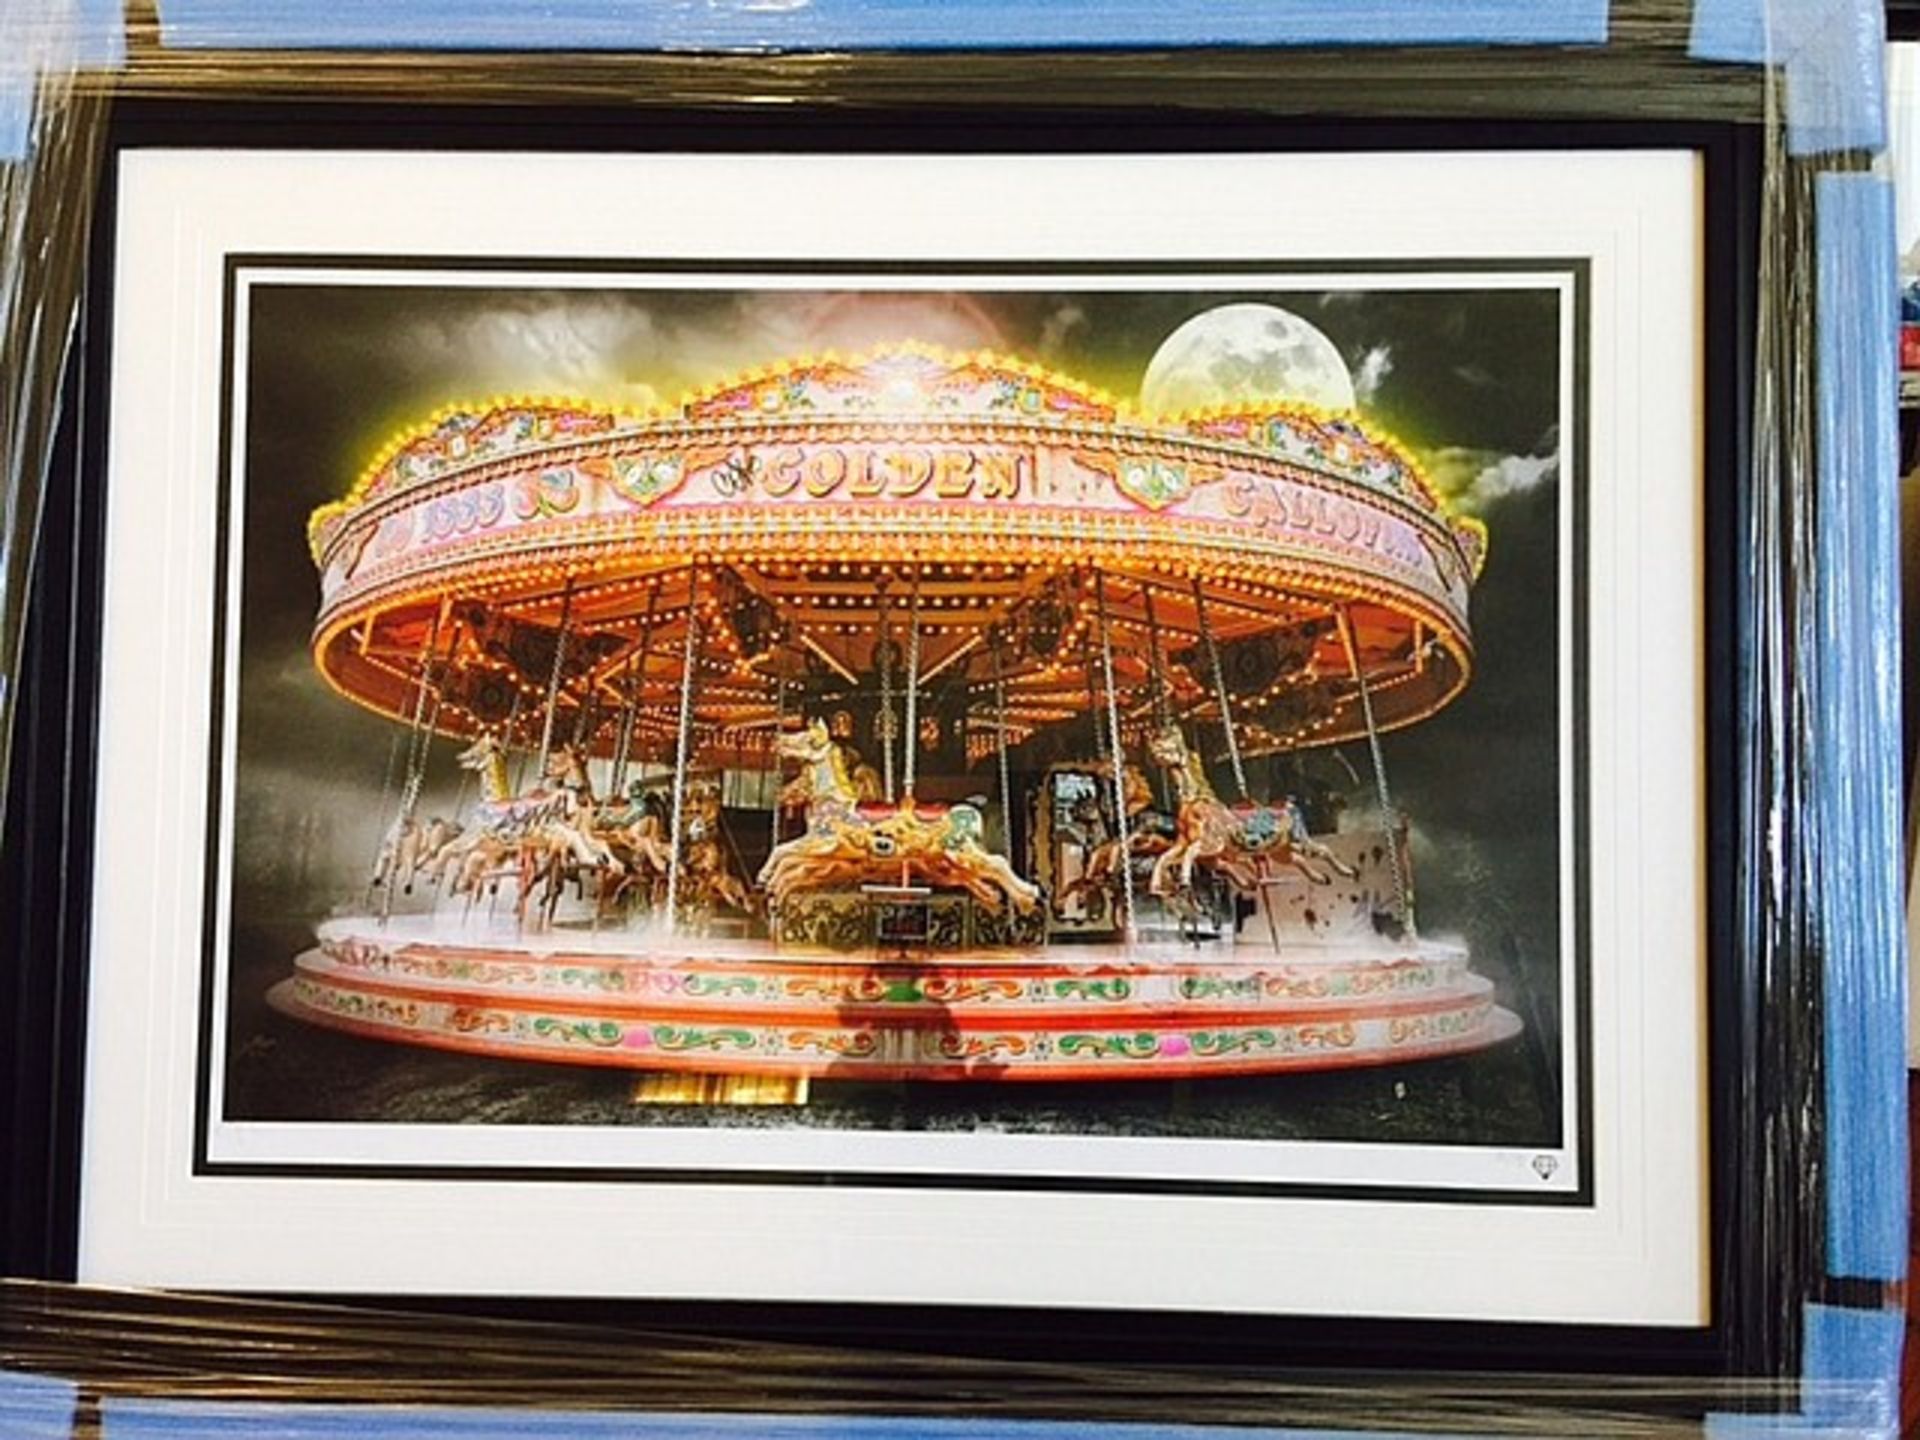 JJ Adams Ltd edition 84/195 "The Carousel",Wishbone, Framed and In Original packaging 42 x 32 Inch - Image 3 of 5